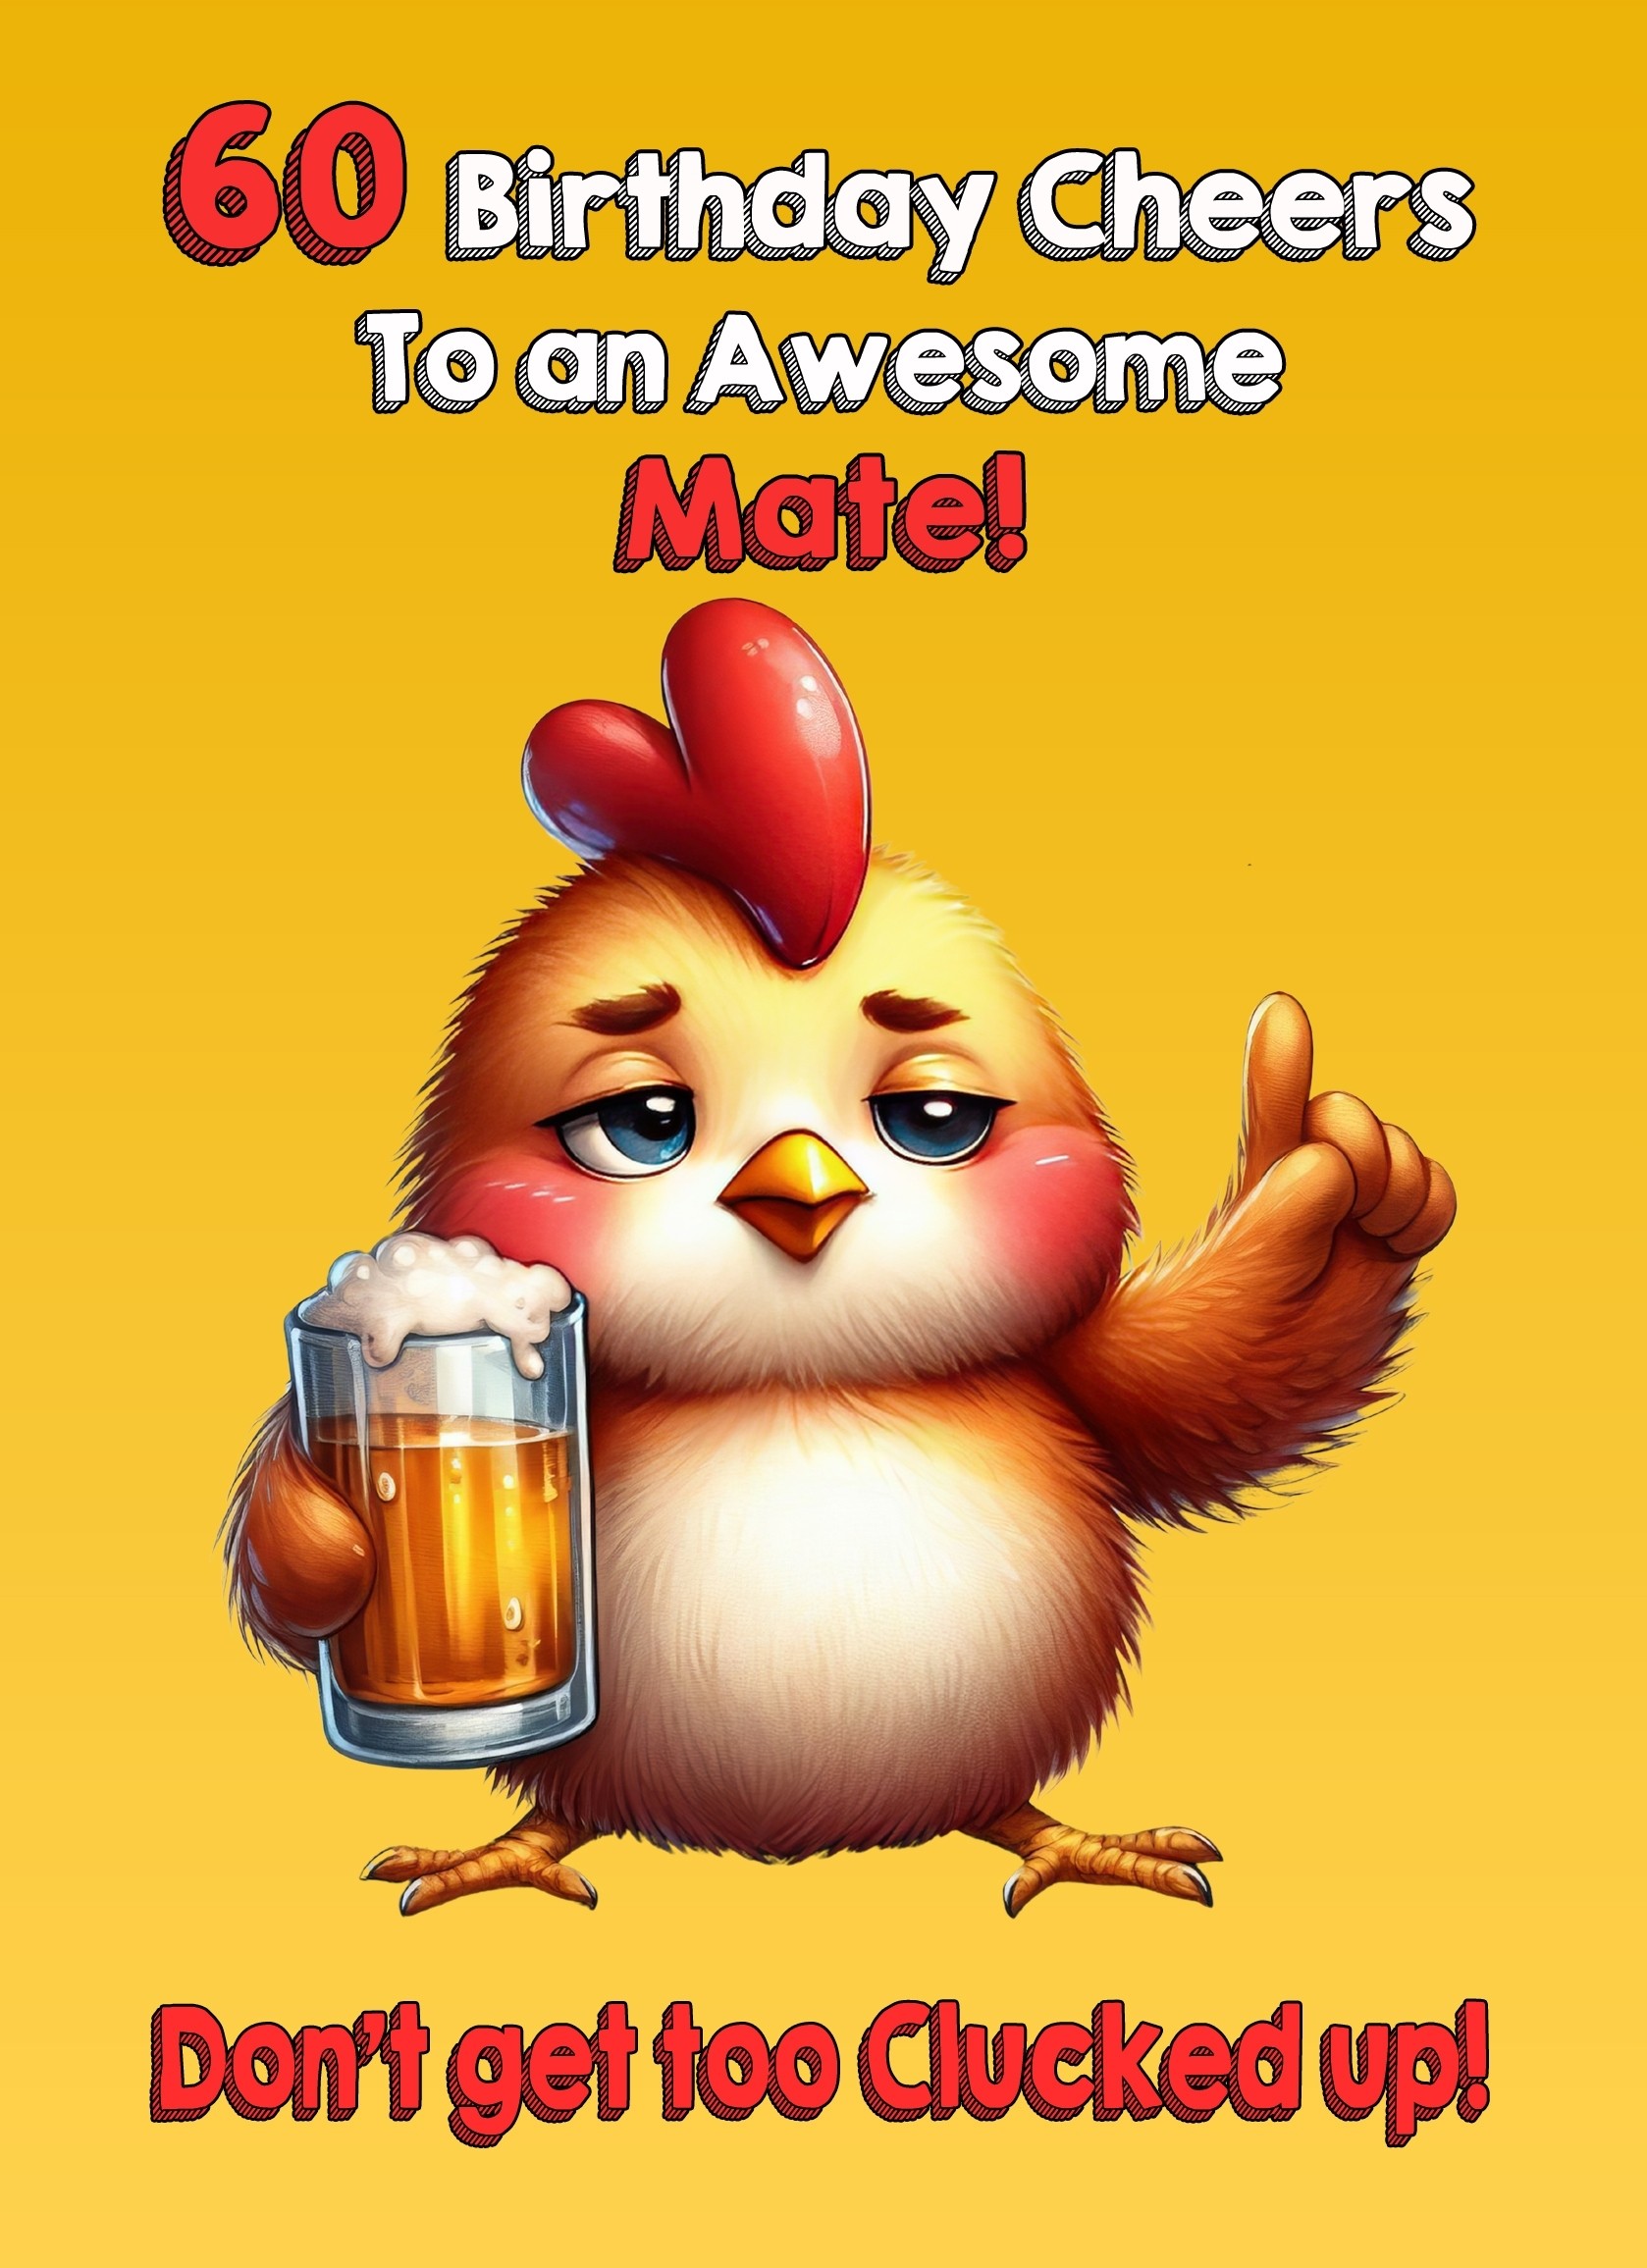 Mate 60th Birthday Card (Funny Beer Chicken Humour)